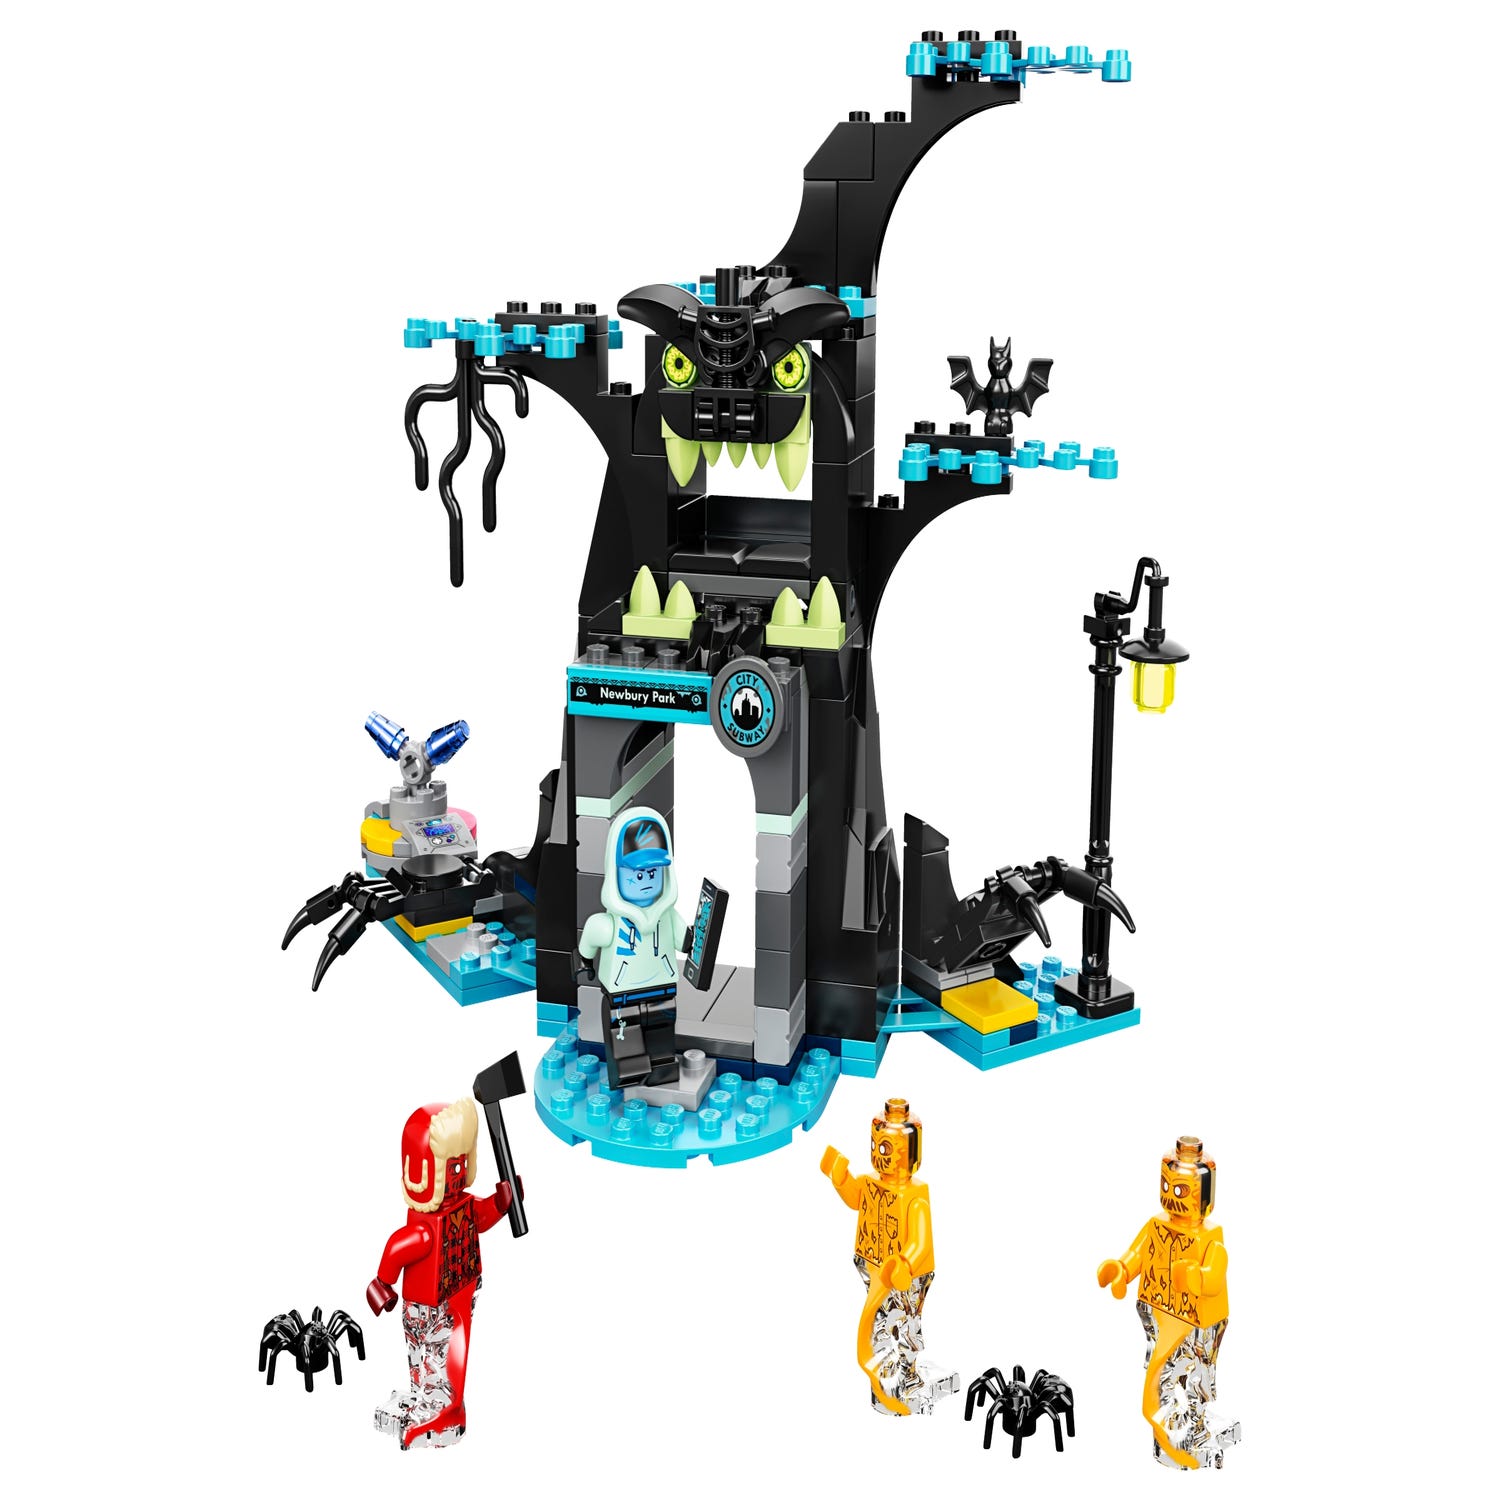 Welcome to the Side 70427 | Hidden Side | Buy online at the Official LEGO® Shop US